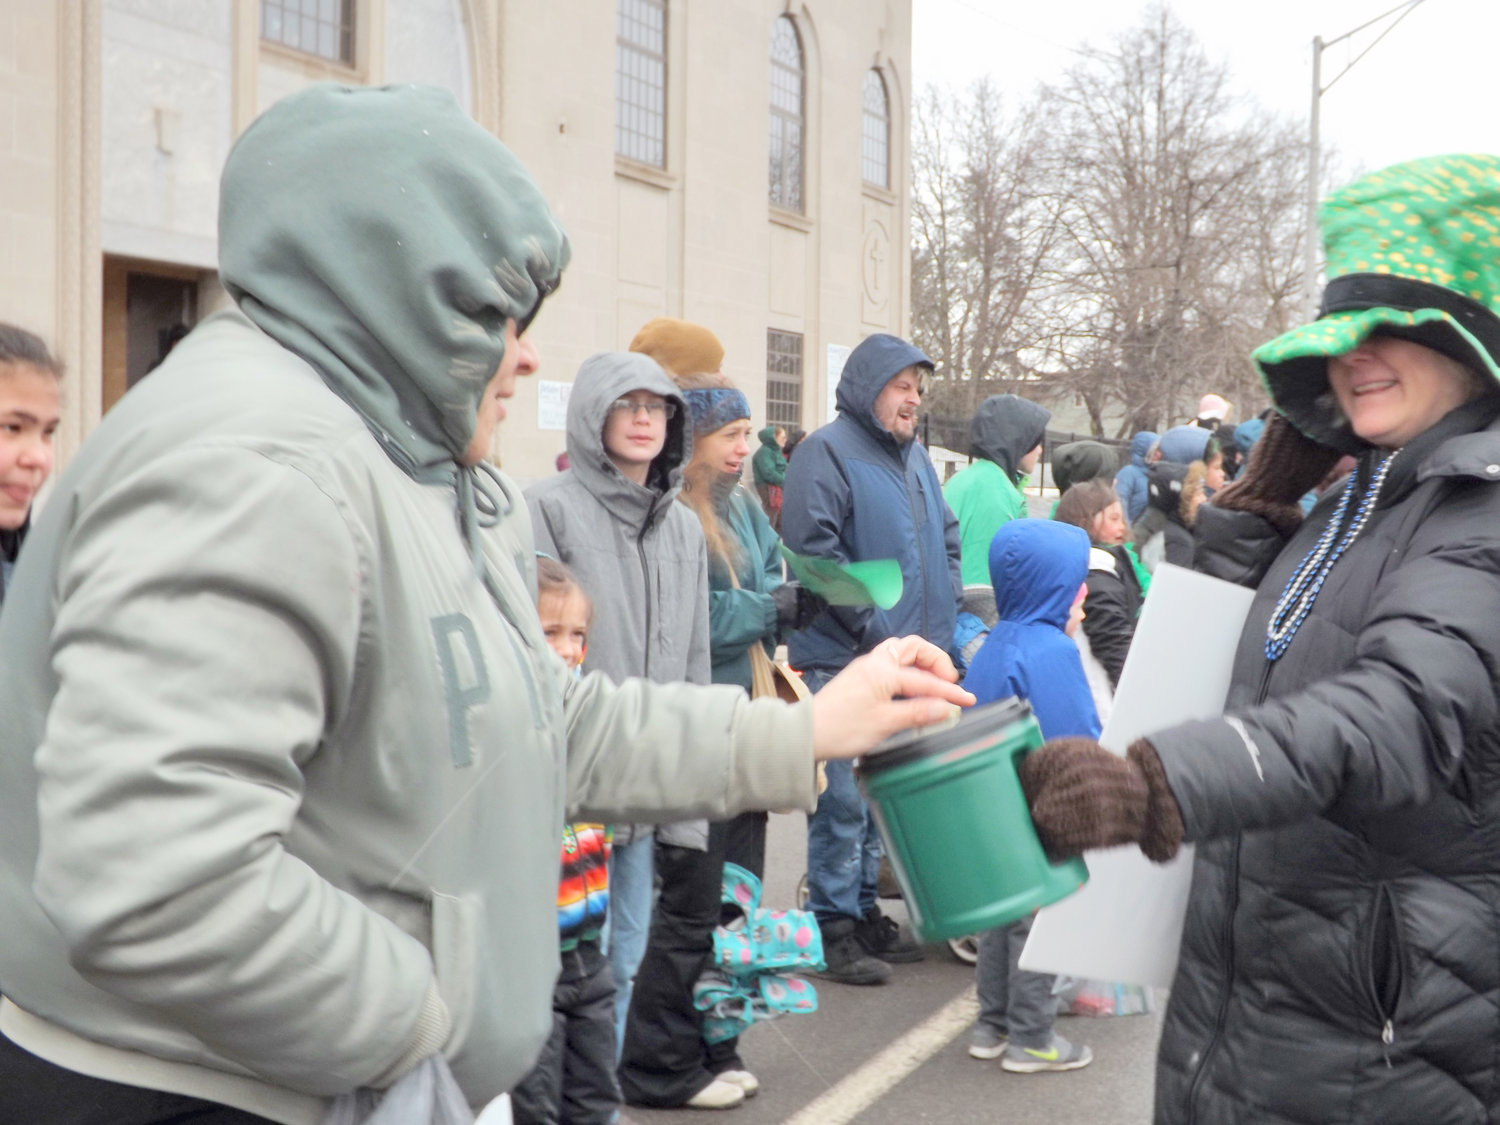 SHARING THE GREEN — A parade-goer at a past St. Patrick’s Day Parade in Utica donates cash to help feed those in need in the community. The annual food drive helps provide vital support for the Mother Marianne West Side Kitchen, organizer’s say.